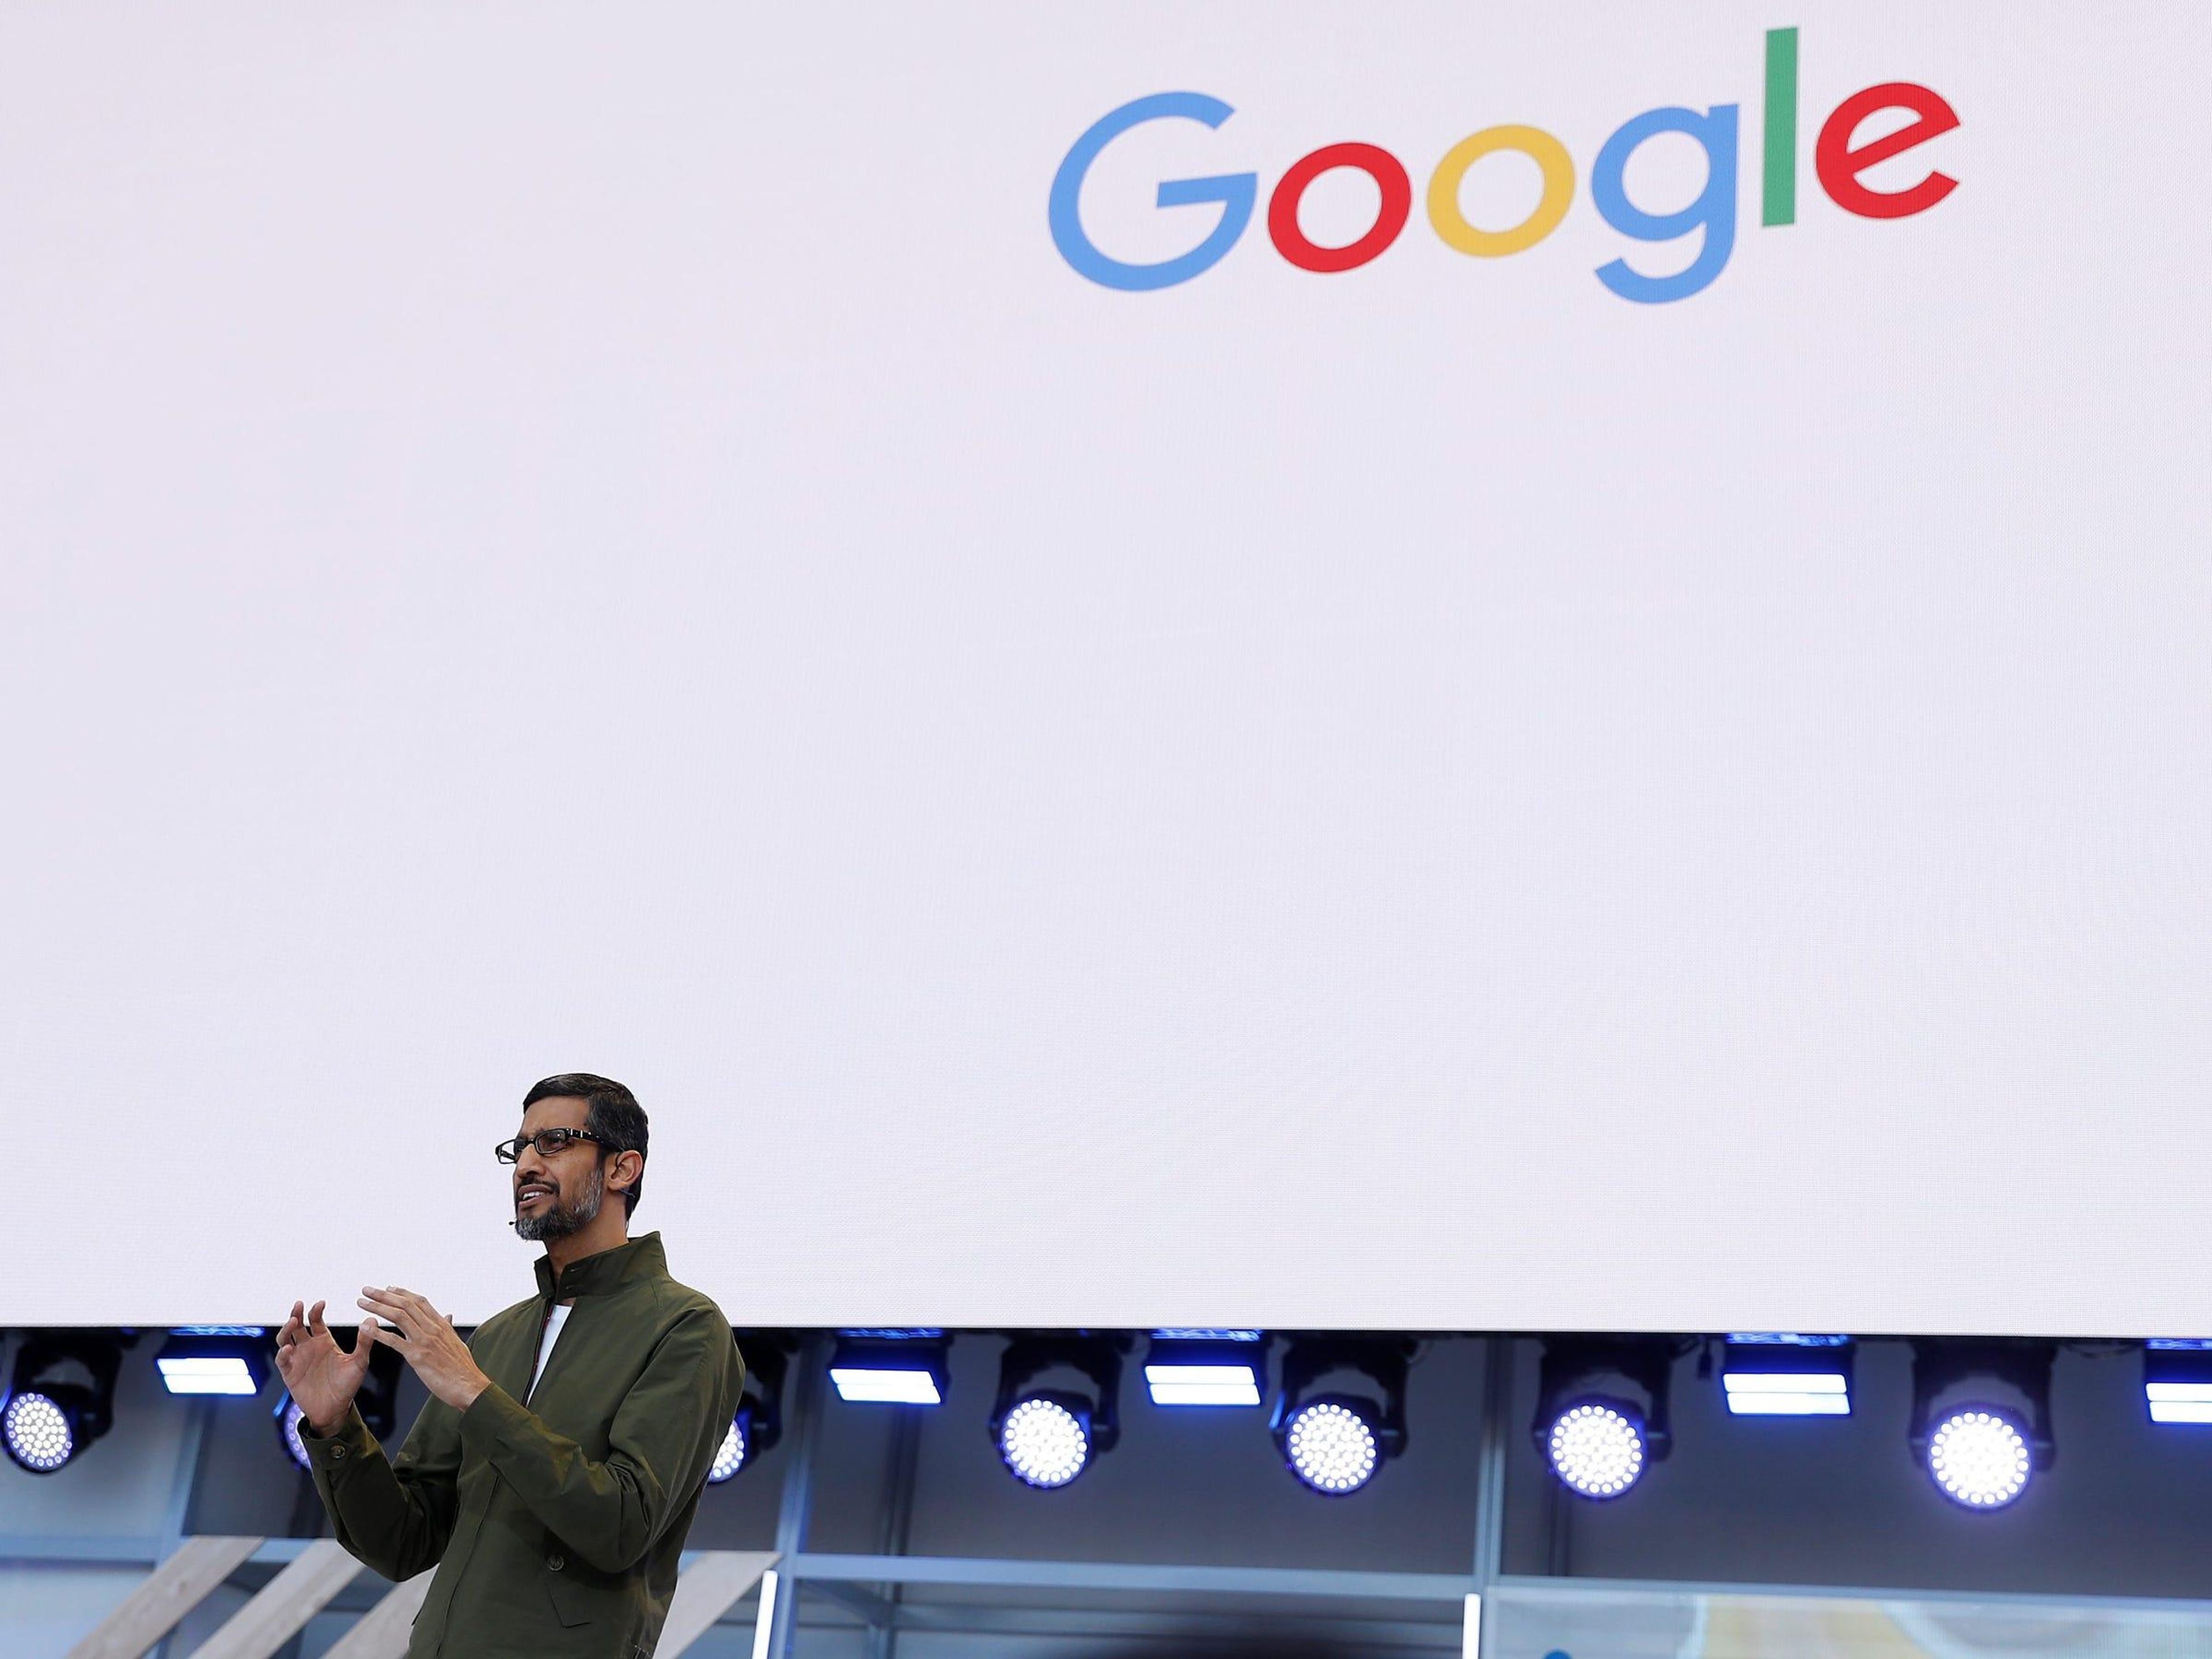 Google CEO Sundar Pichai speaks on stage during the annual Google I/O developers conference in Mountain View, California, in 2018.